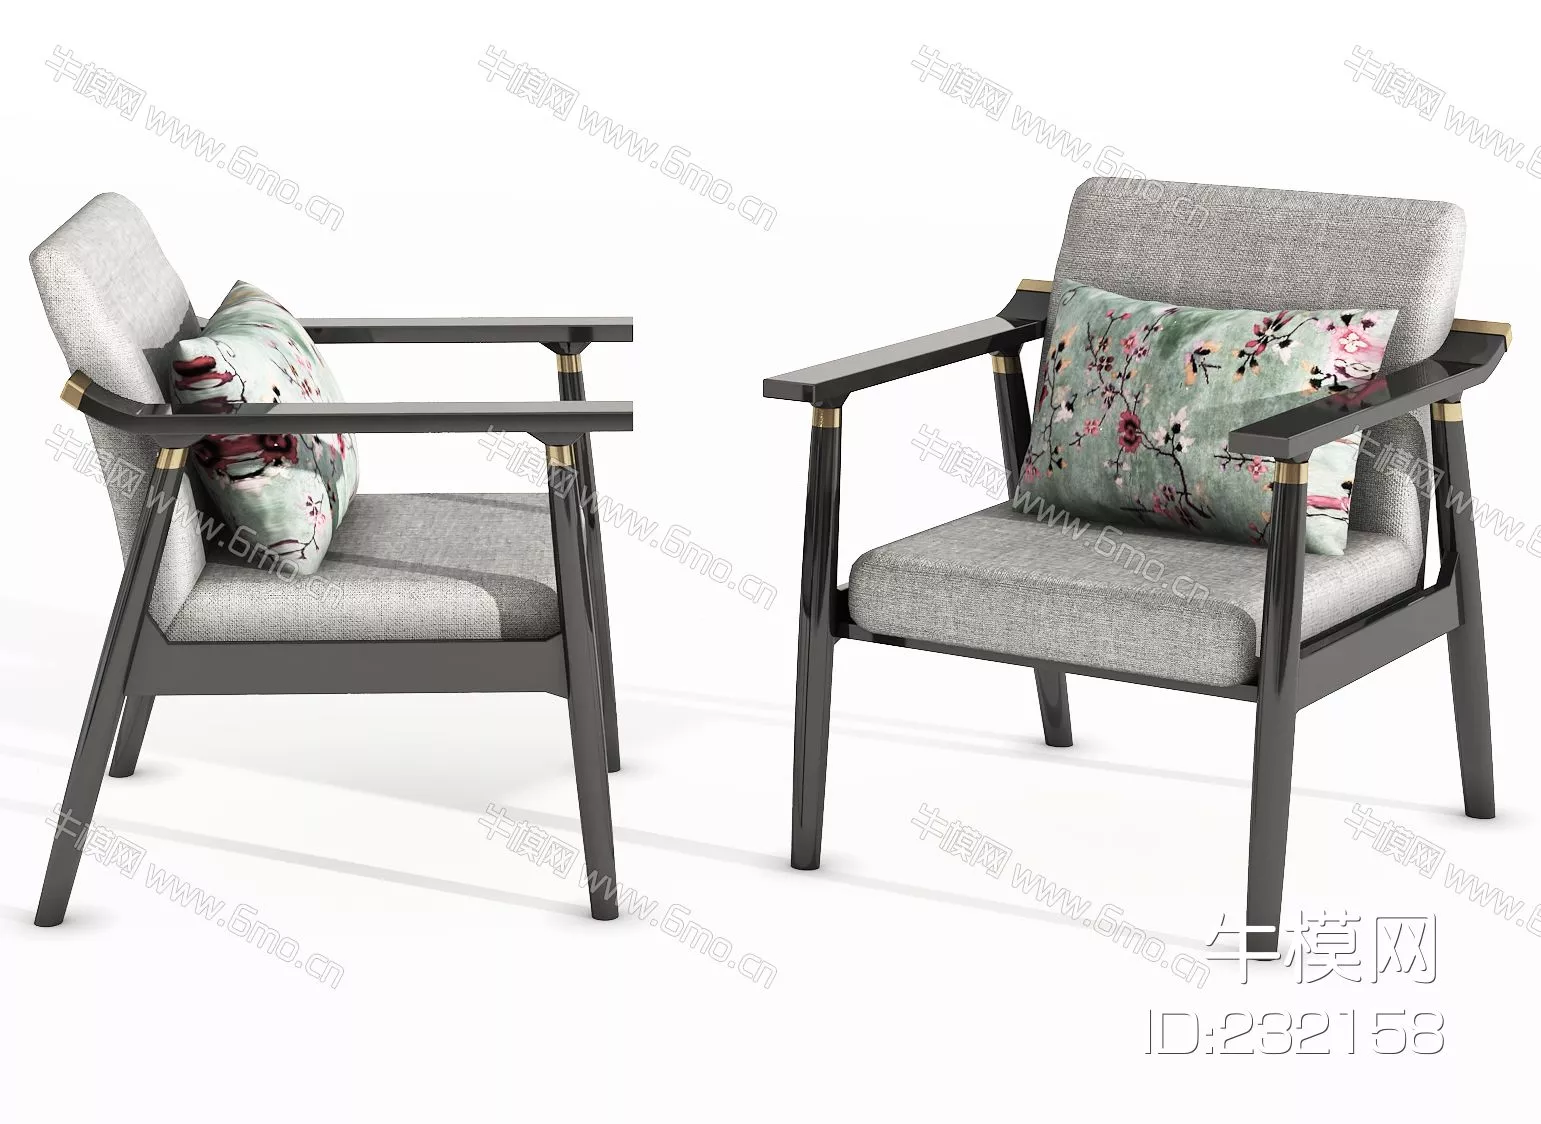 CHINESE LOUNGLE CHAIR - SKETCHUP 3D MODEL - VRAY - 232158